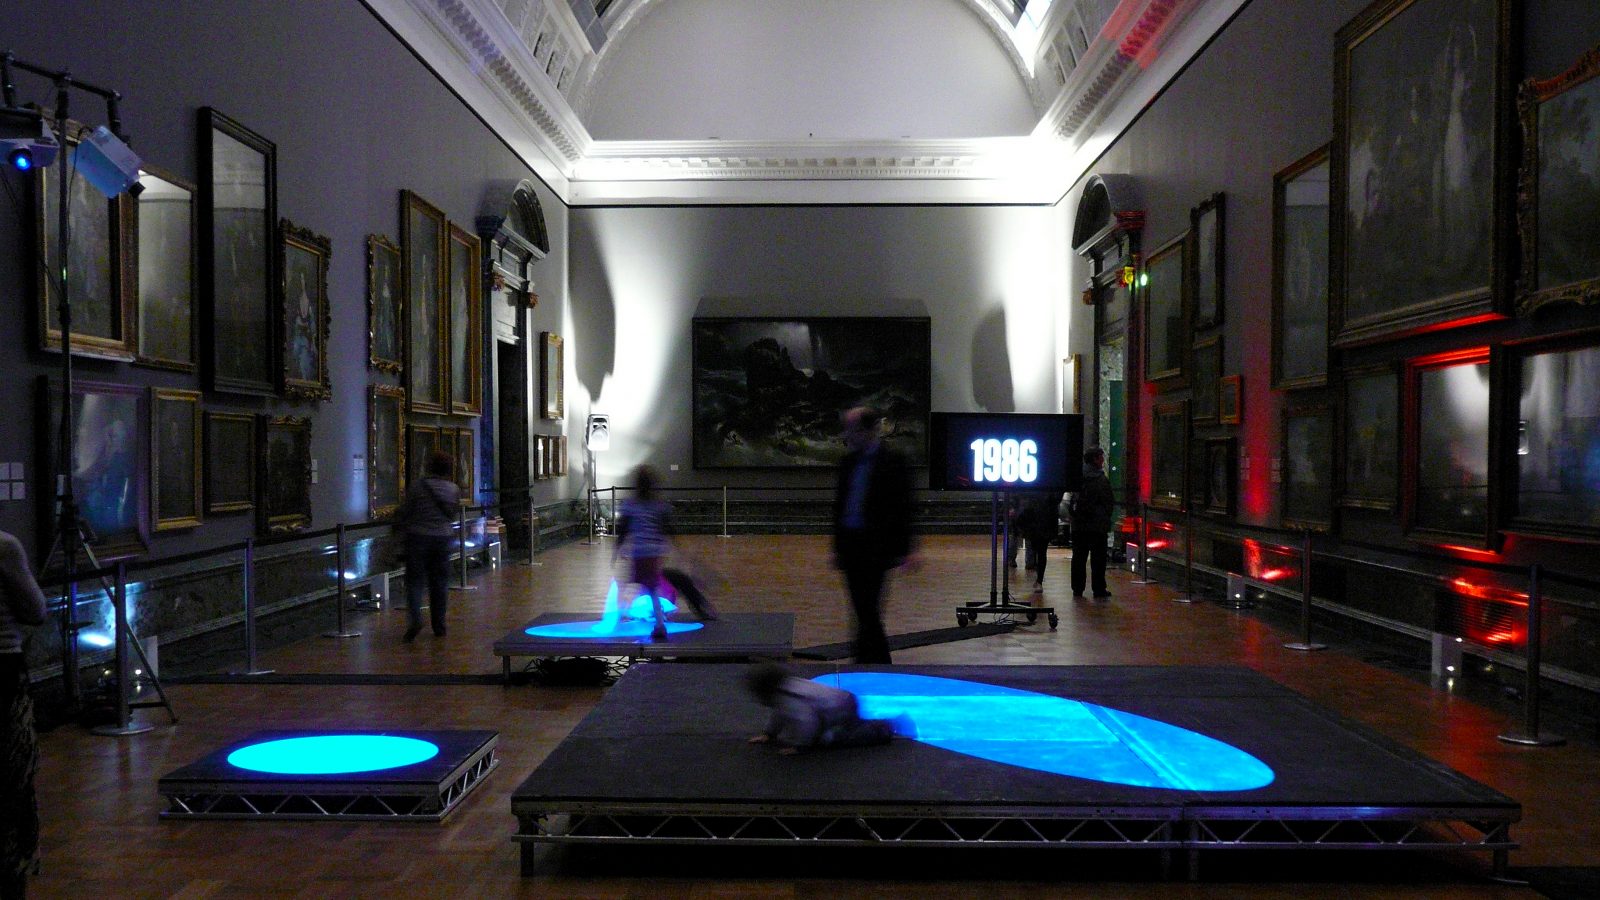 The Redistribution of Wealth installed at Tate Britain in 2012